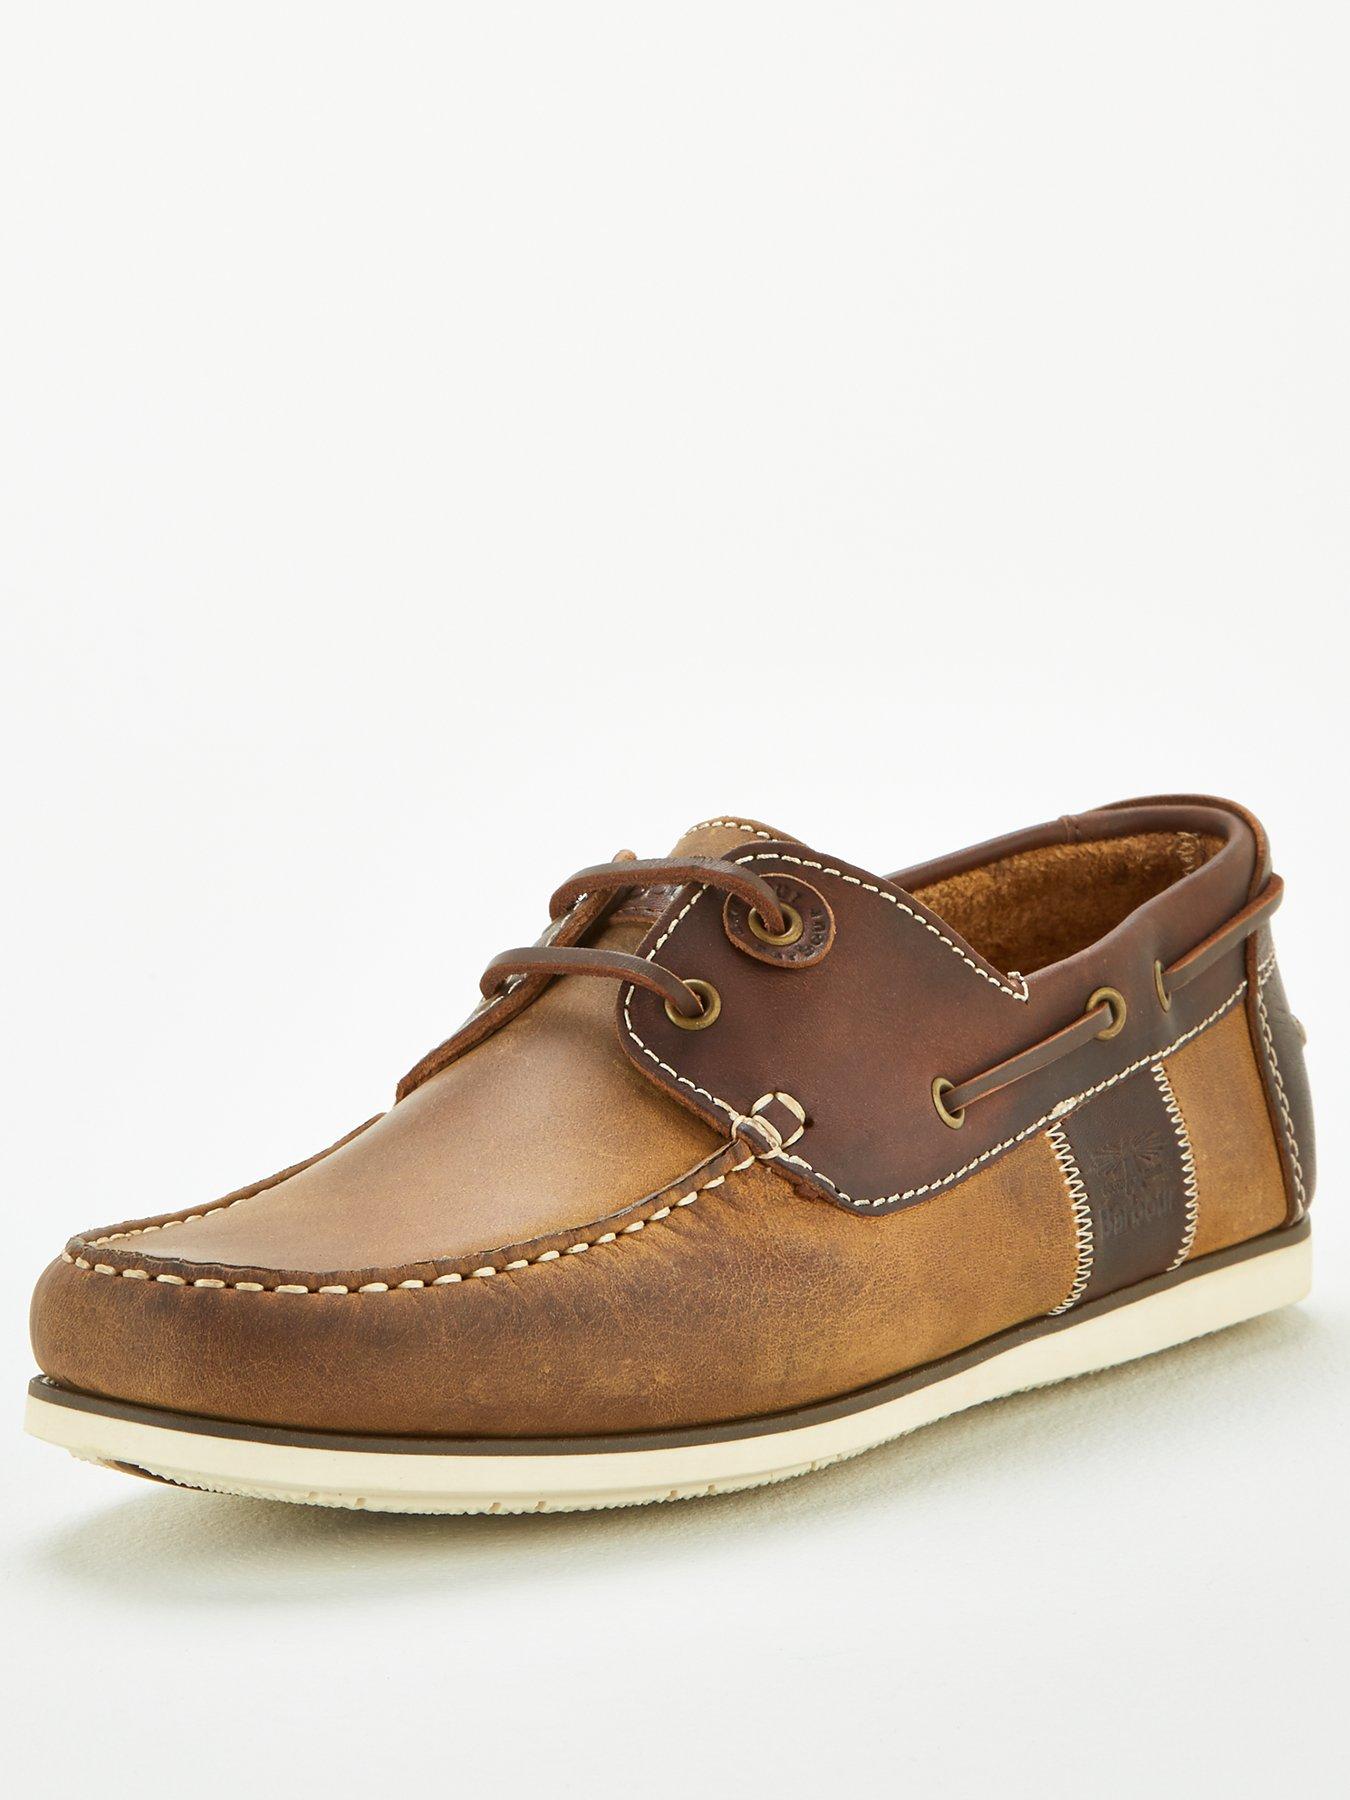 Barbour Capstan Leather Boat Shoes 